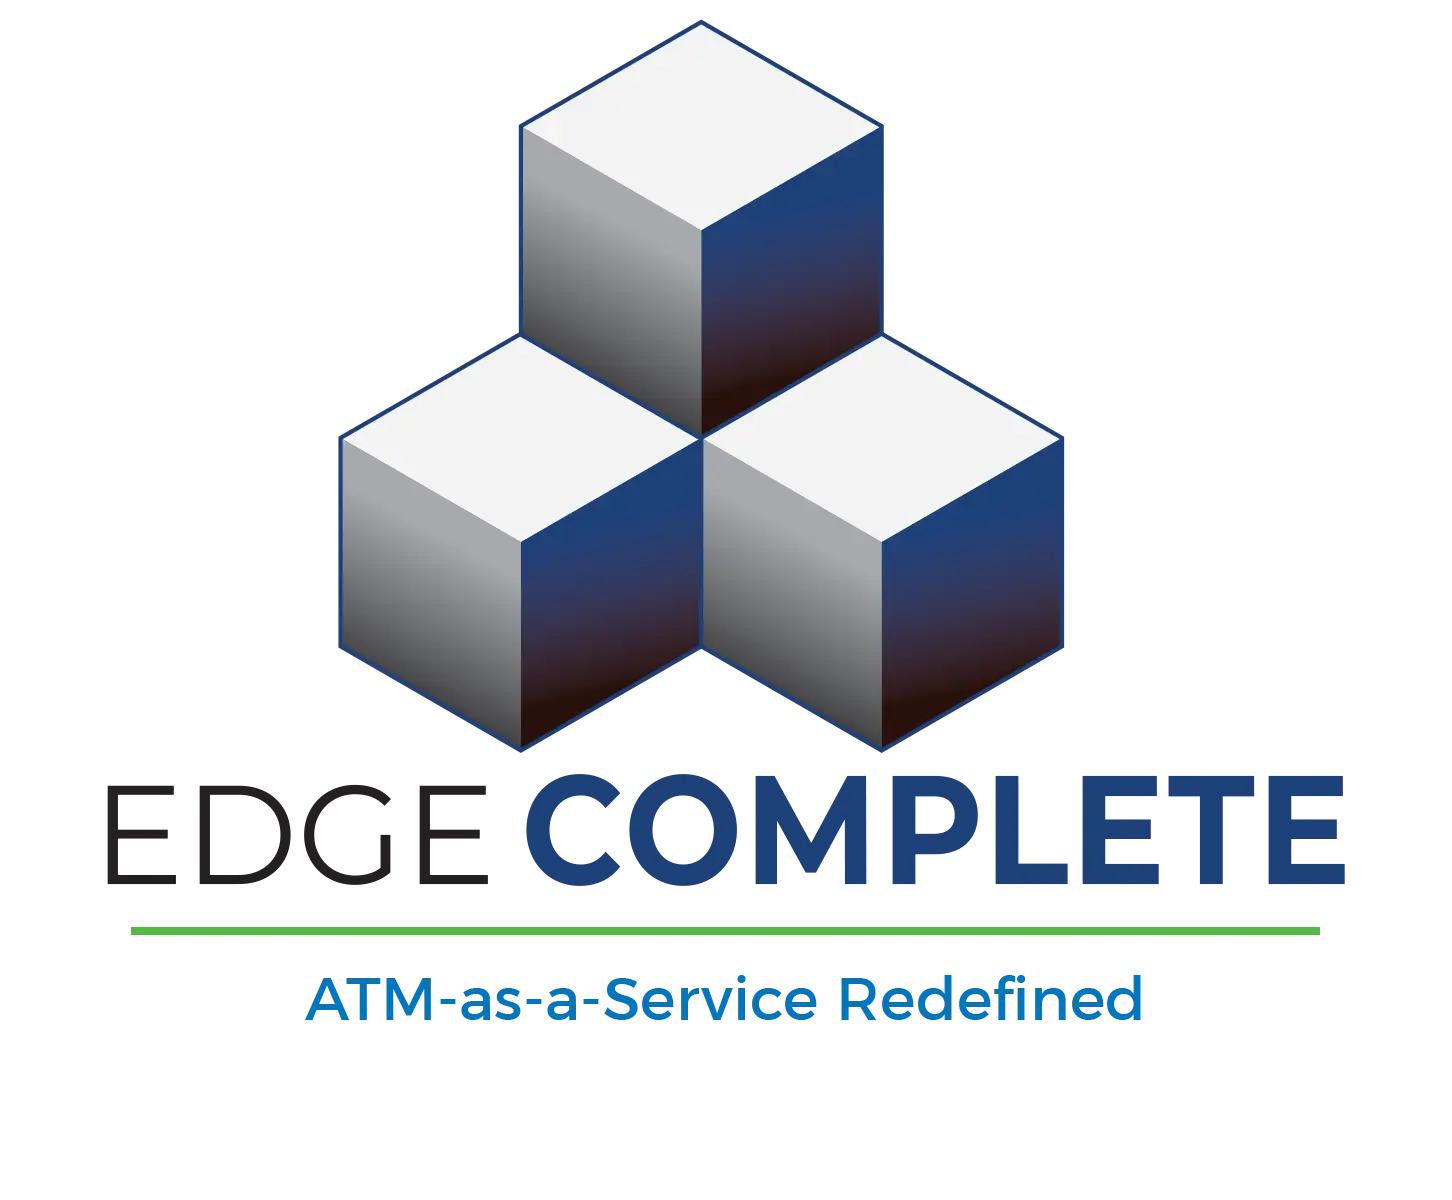 The logo for Edge Complete, a comprehensive ATM management program, the best solution for ATM service and management